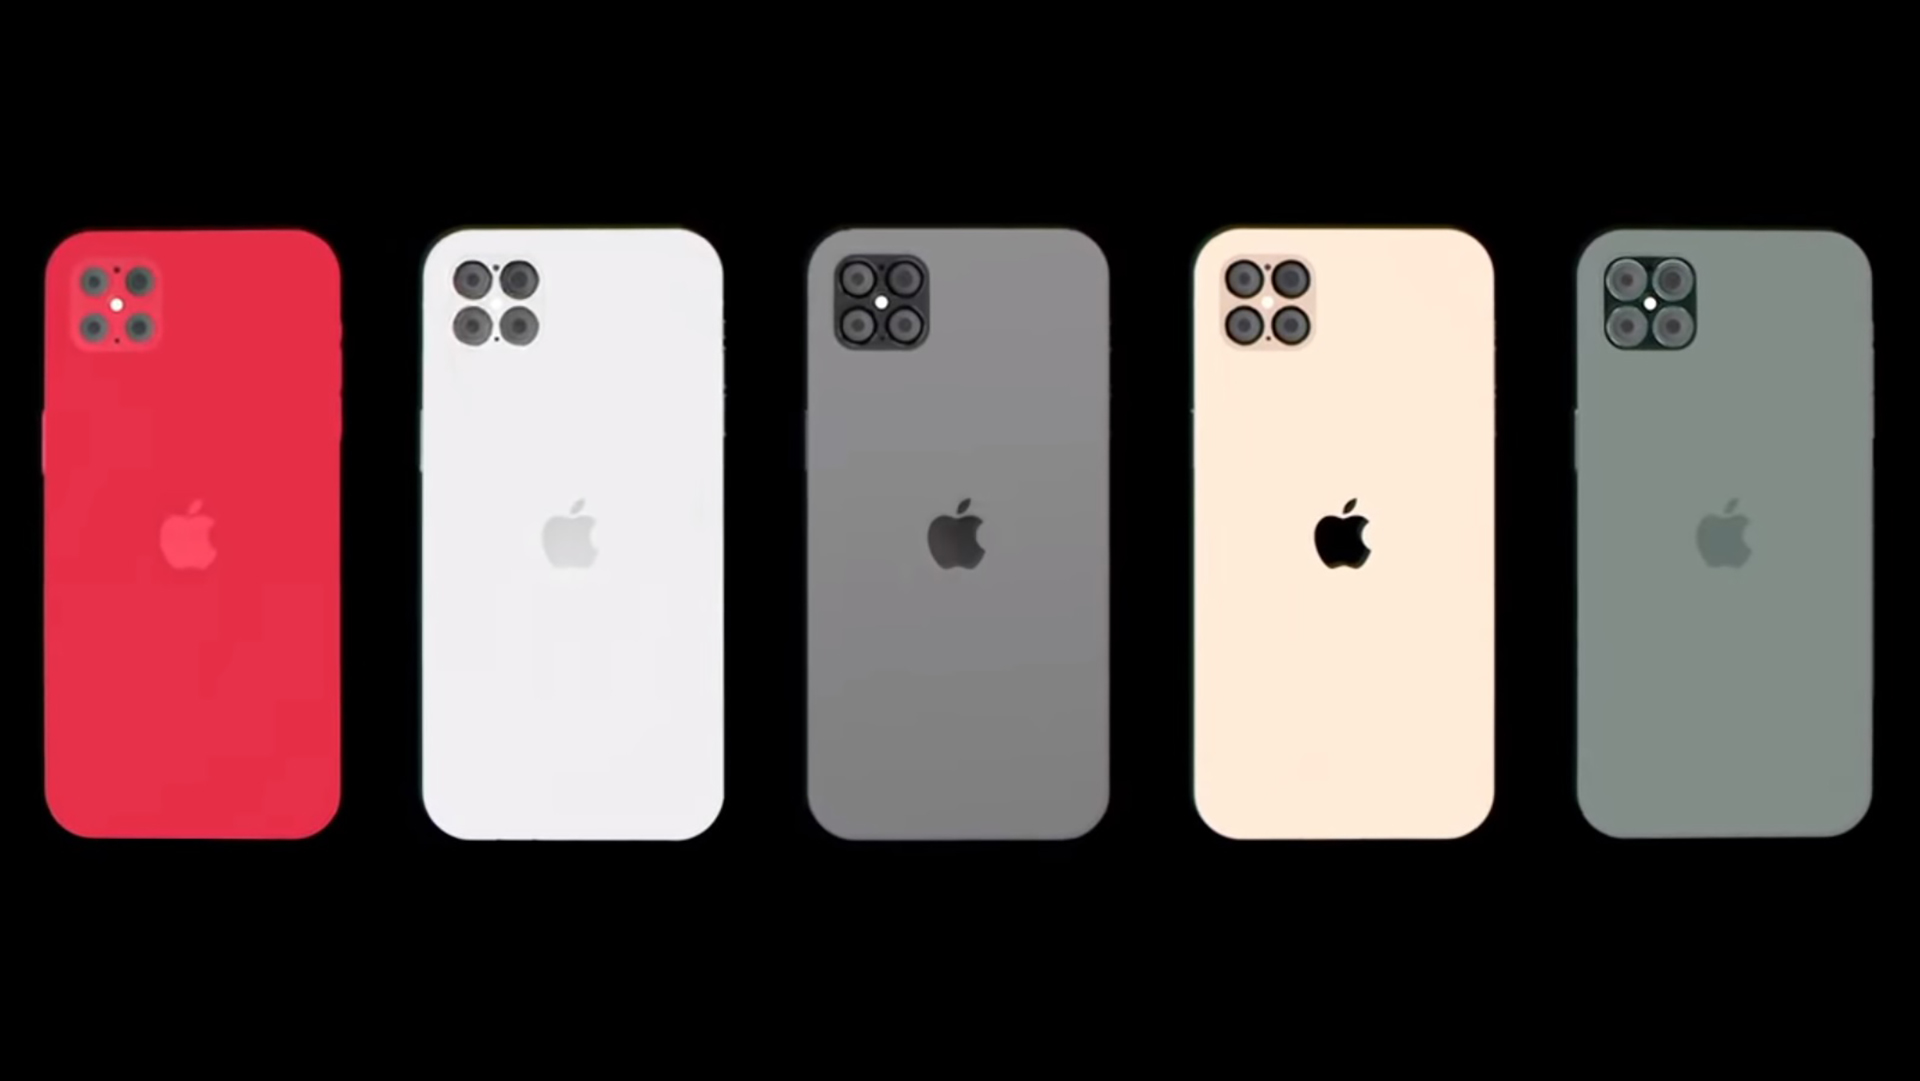 iPhone 12 Concept Images